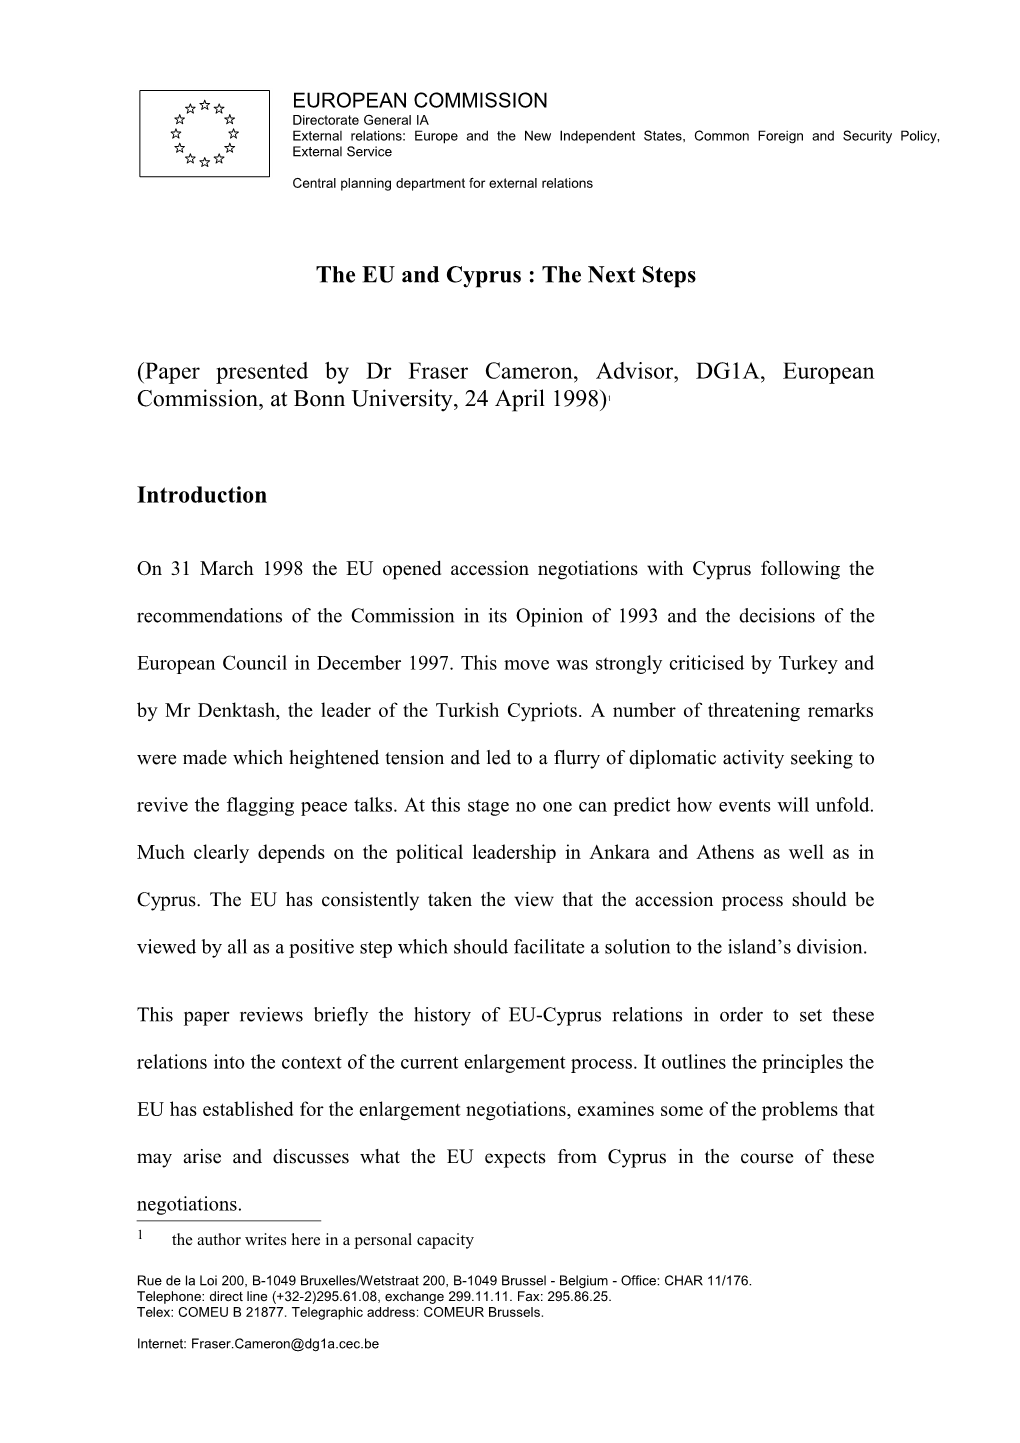 The EU and Cyprus : the Next Steps